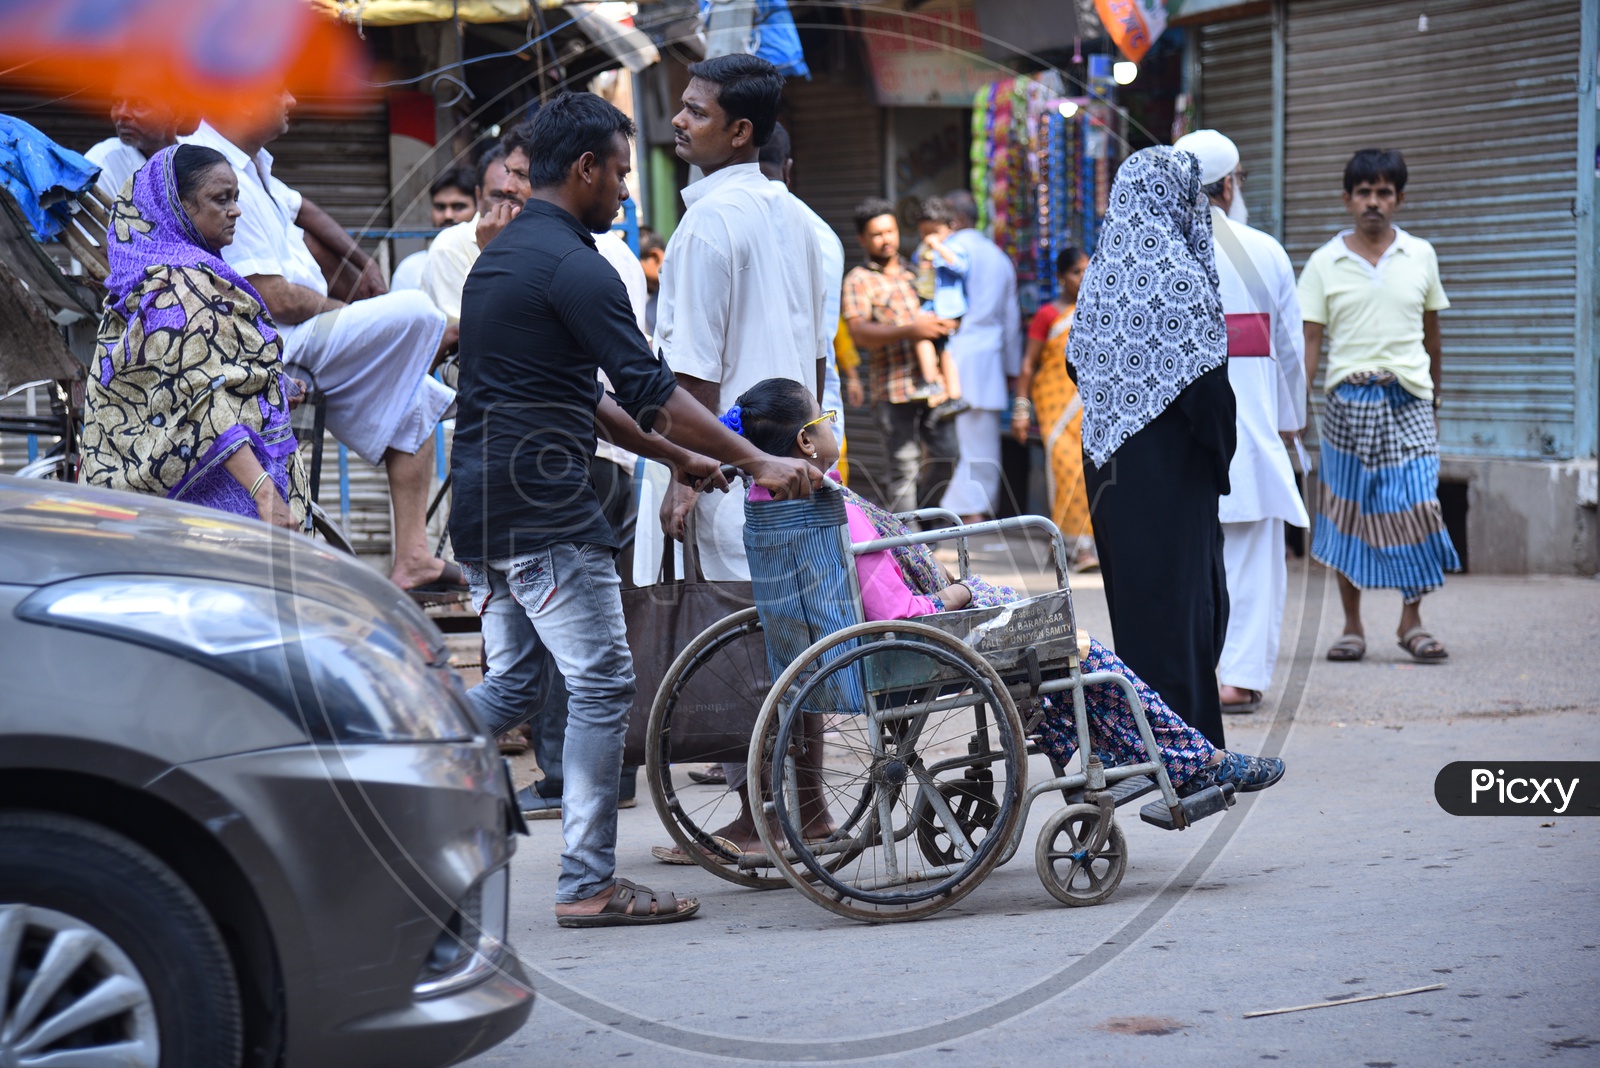 A Young Man Taking Physically Challenged woman In a Wheel Chair to a Polling Station